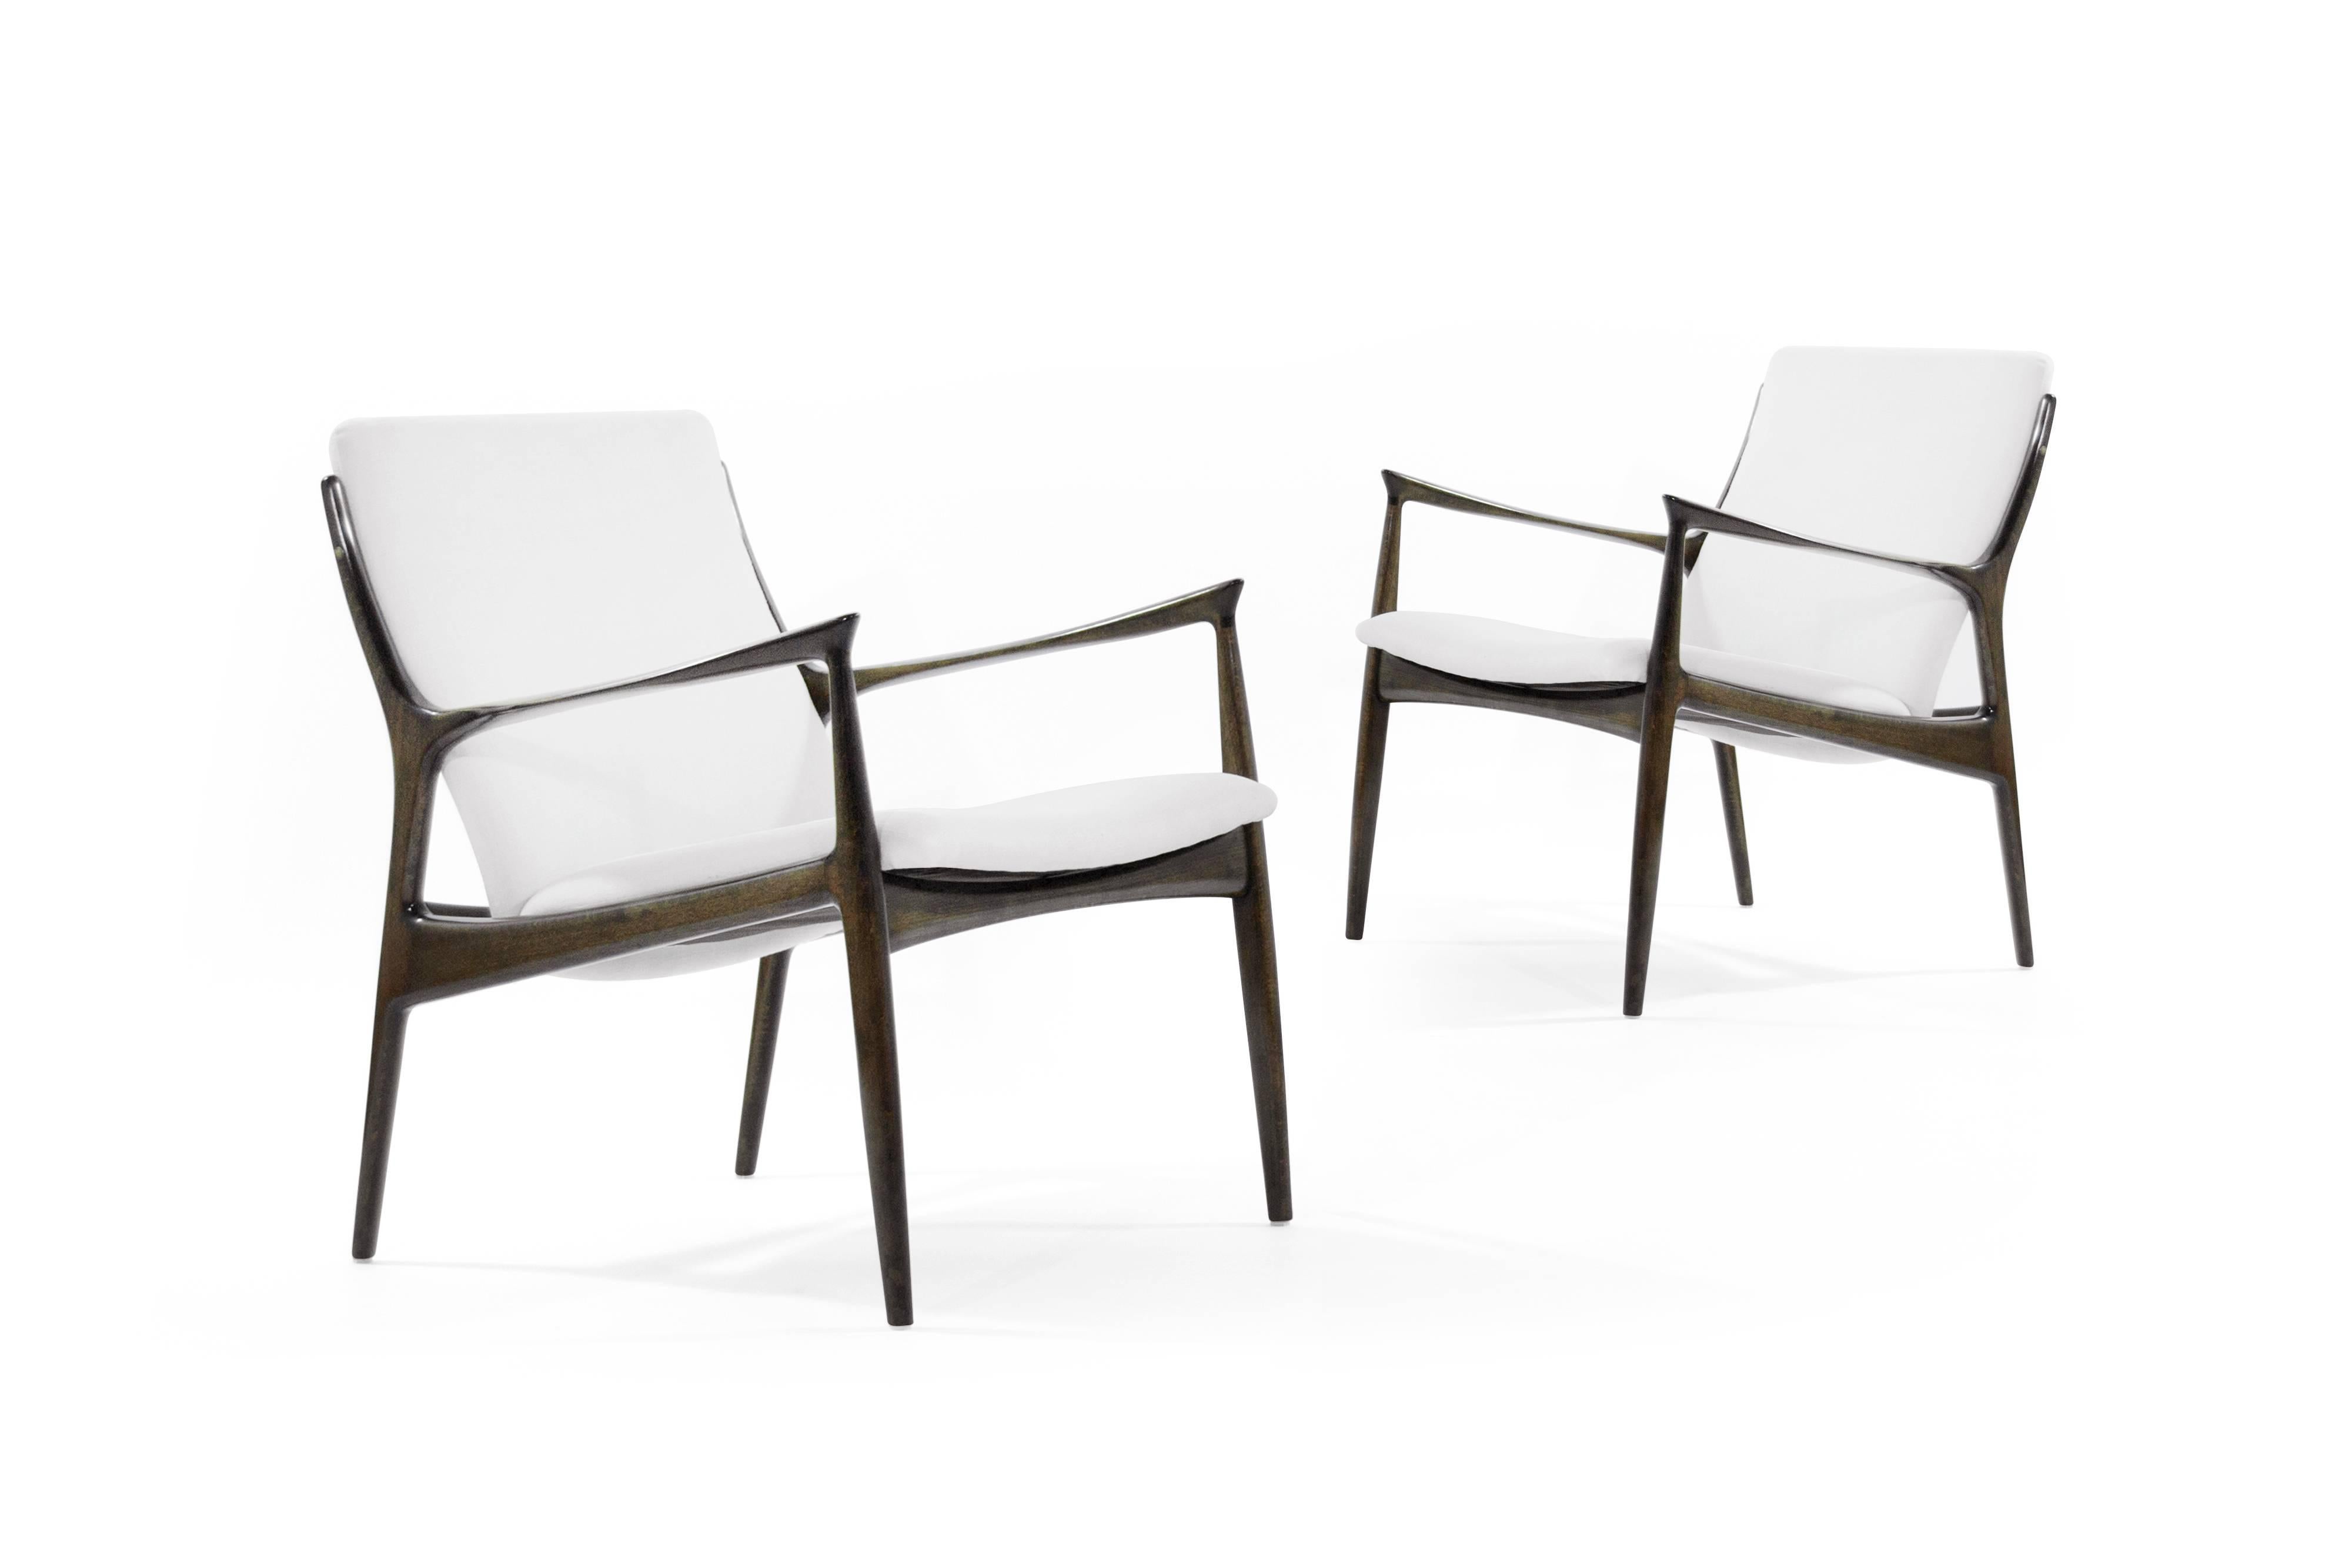 Pair of sculptural Danish modern lounge chairs by Ib Kofod-Larsen. Sculptural frames fully restored. Seat and backrest newly upholstered in linen.